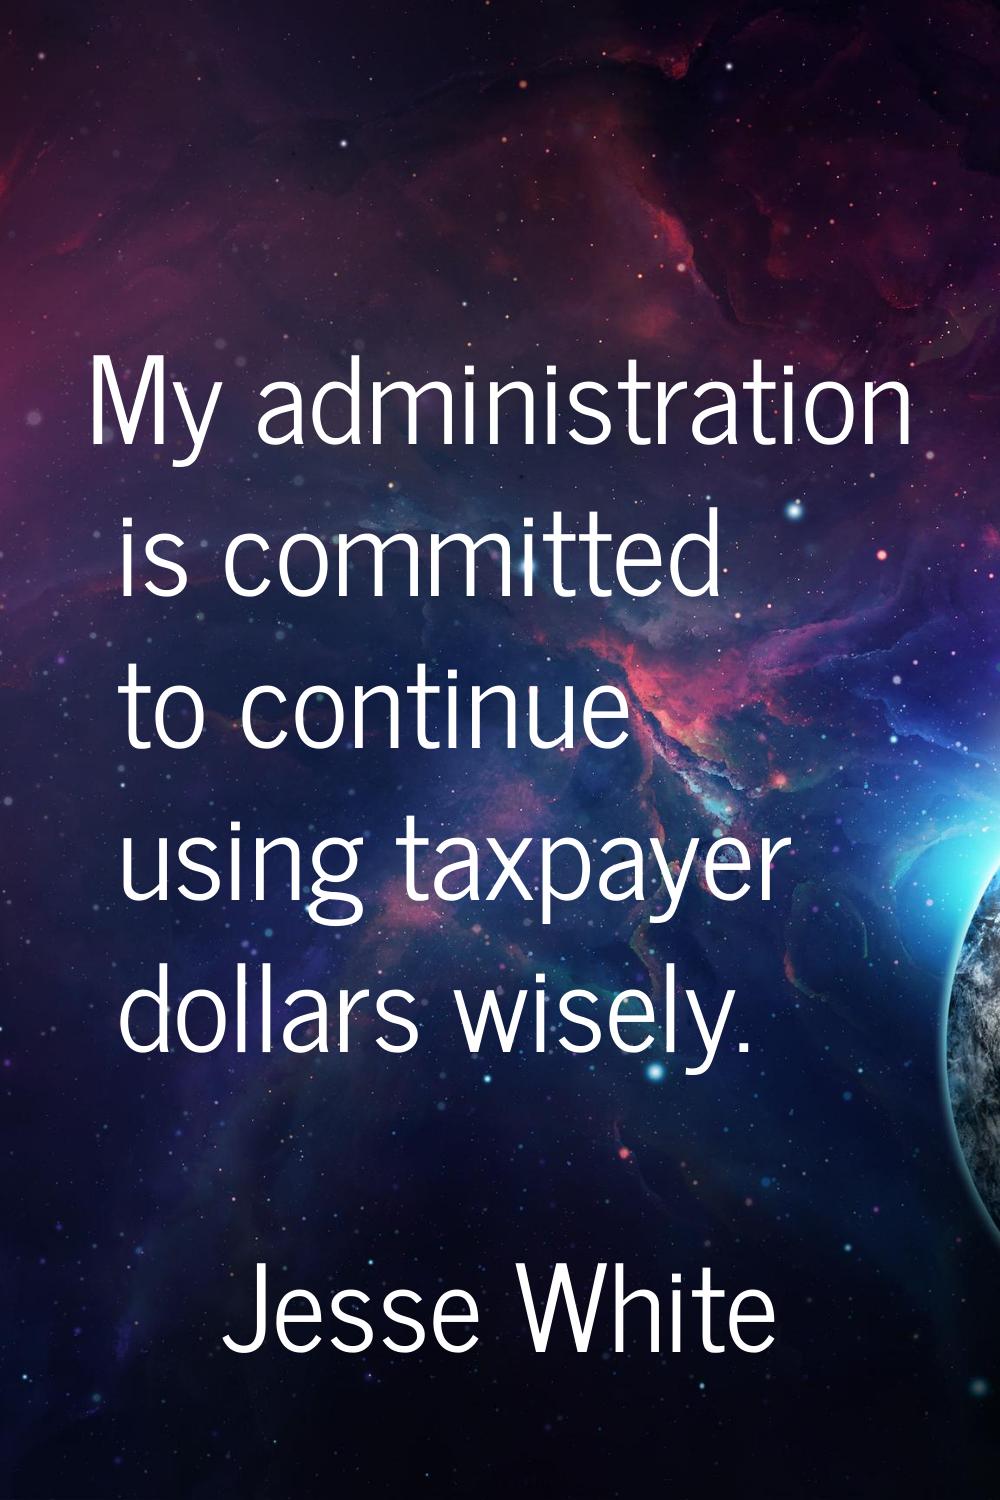 My administration is committed to continue using taxpayer dollars wisely.